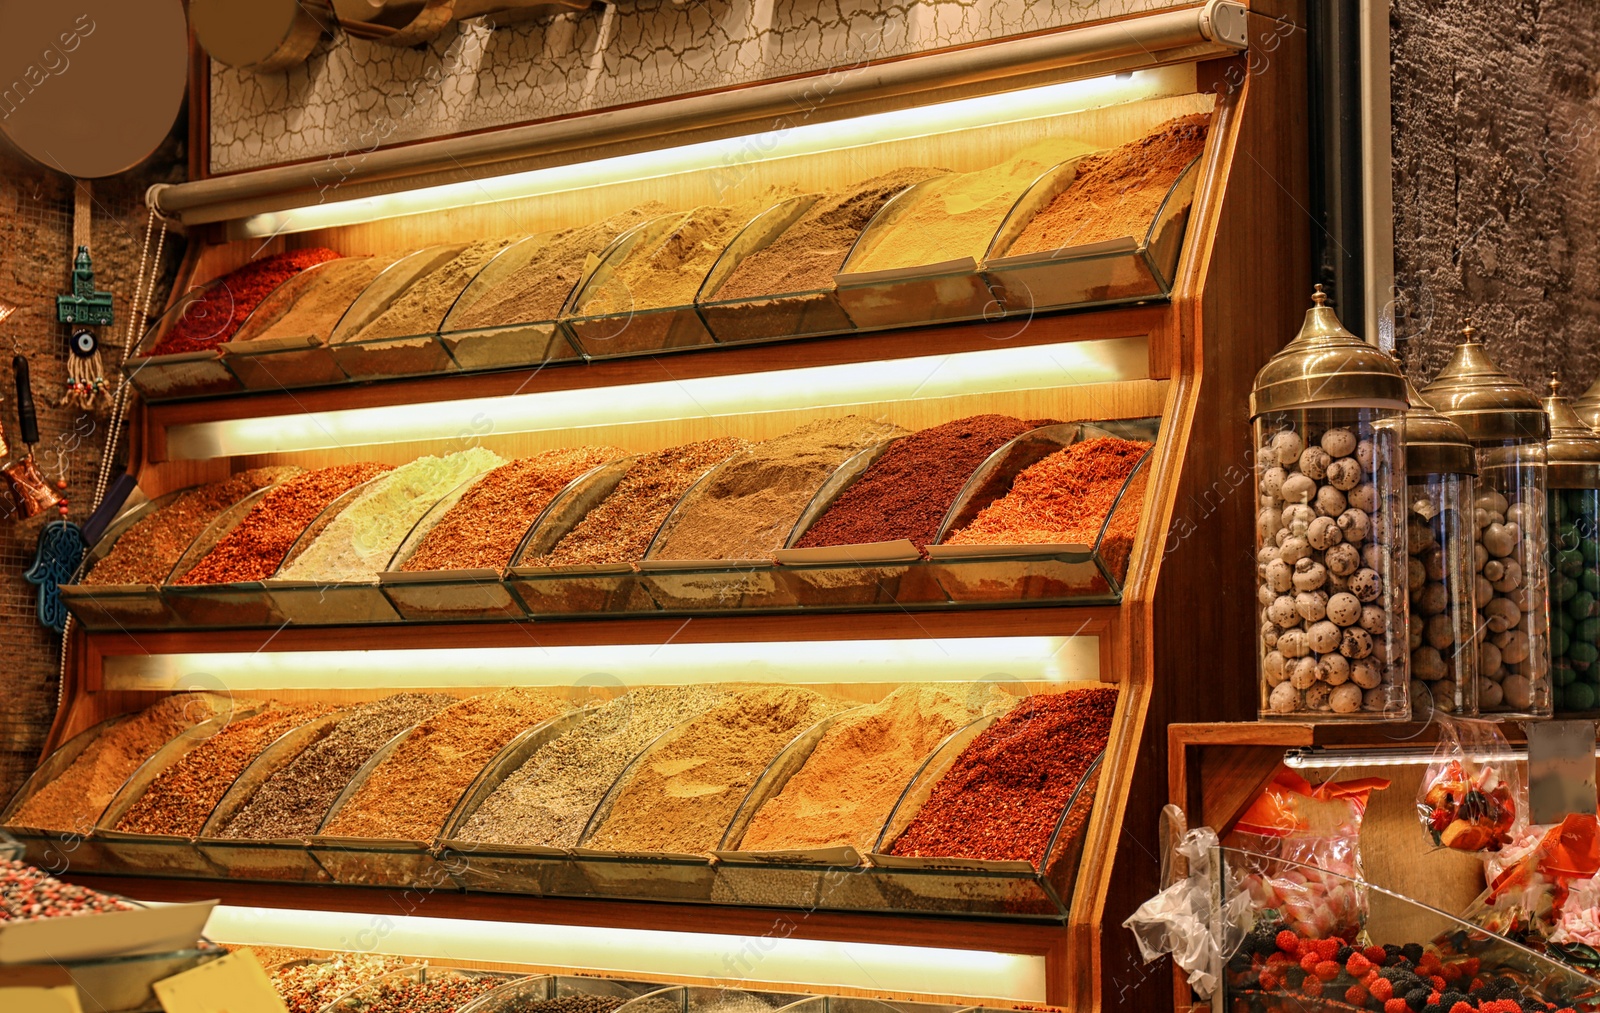 Photo of Shelves with colorful aromatic spices at market